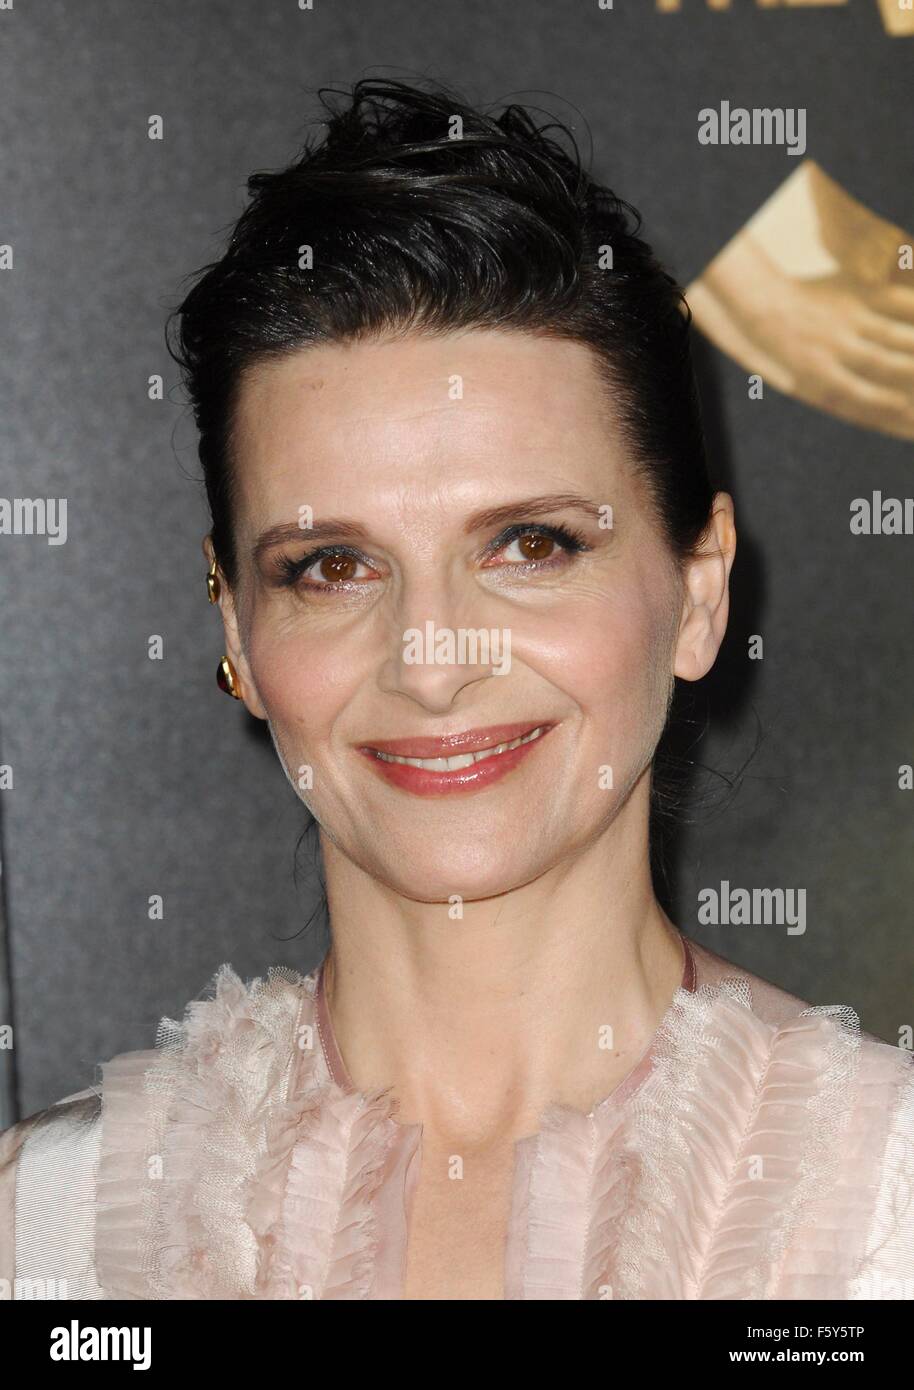 Los Angeles, CA, USA. 9th Nov, 2015. Juliette Binoche at arrivals for THE 33 Premiere at at AFI Fest, TCL Chinese 6 Theatres (formerly Grauman's), Los Angeles, CA November 9, 2015. Credit:  Elizabeth Goodenough/Everett Collection/Alamy Live News Stock Photo